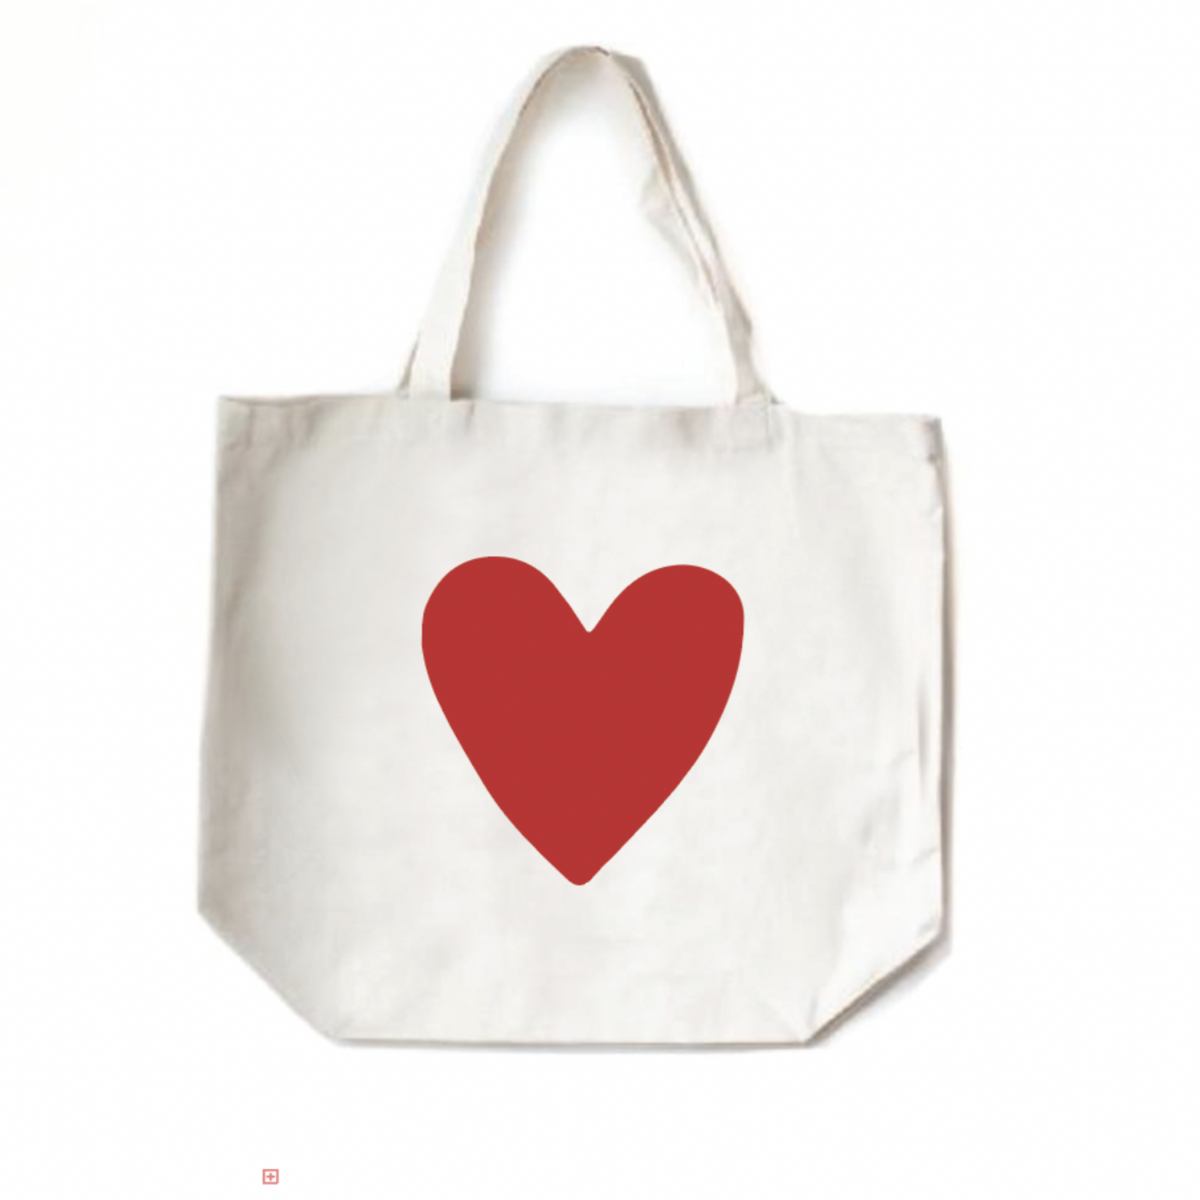 The Penny Paper Co. - Tote Bag, Red Heart